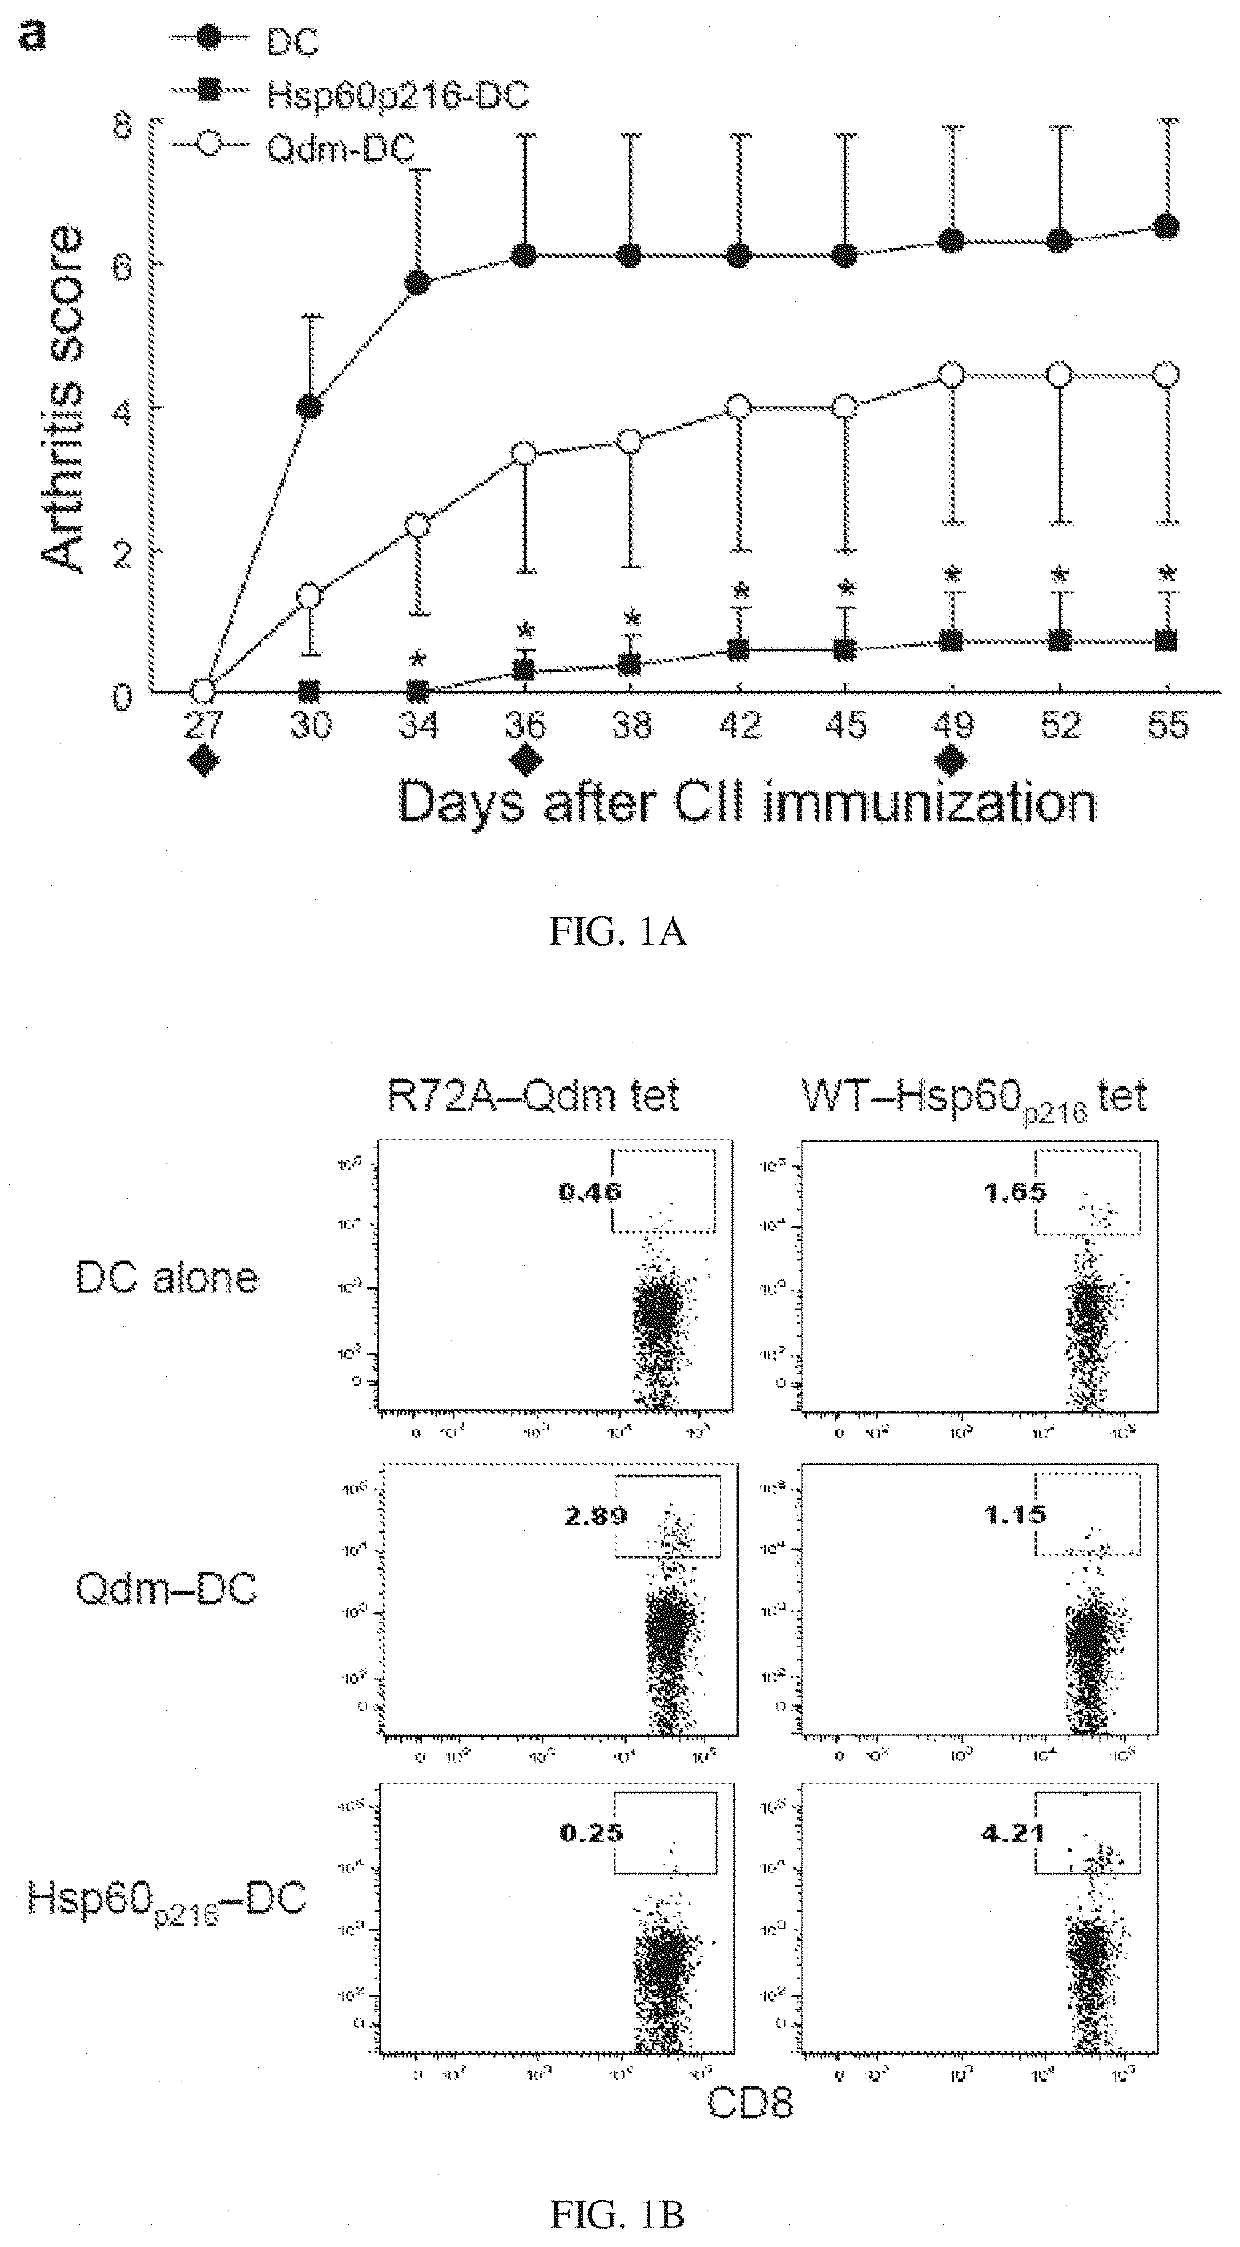 Targeted expansion of Qa-1-peptide-specific regulatory CD8 T cells to ameliorate arthritis